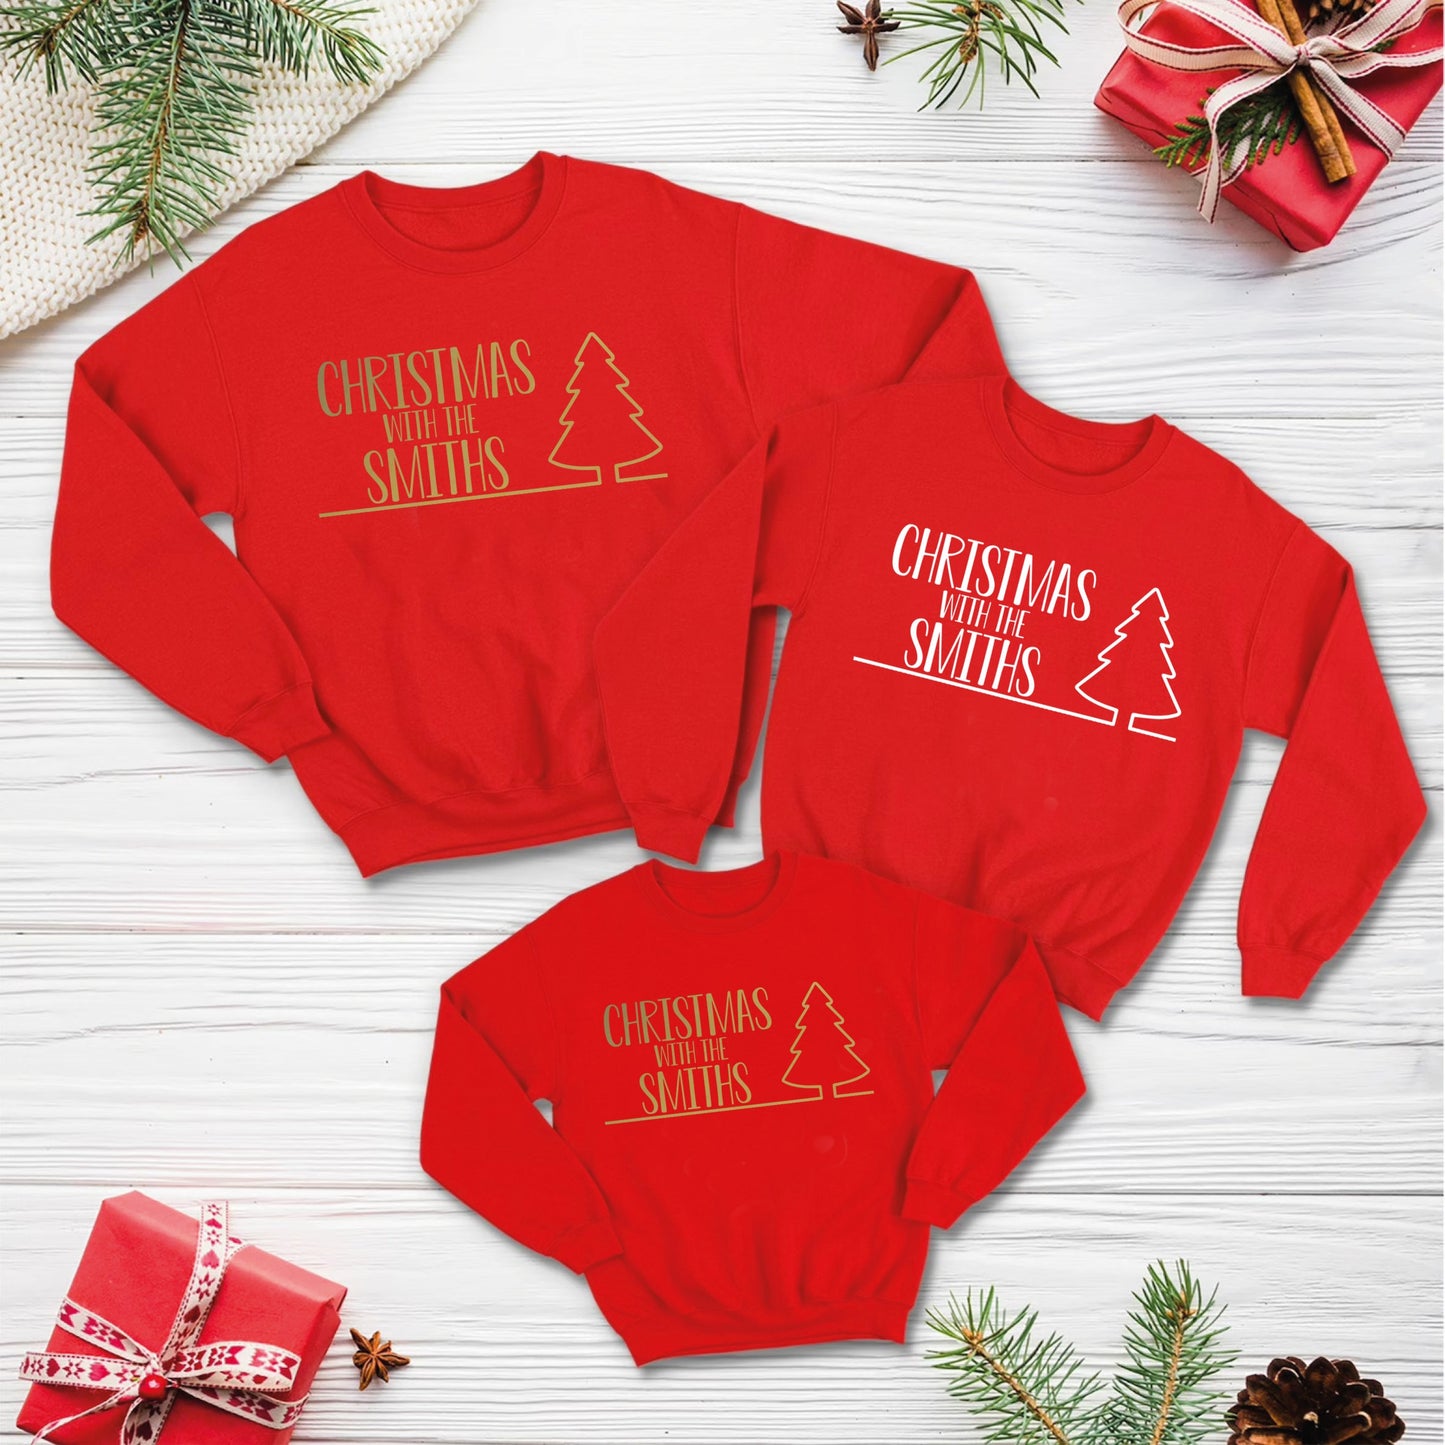 Christmas with the (Family Name) Sweatshirts JH030J | Matching Christmas Jumpers | Xmas Sweaters for the family